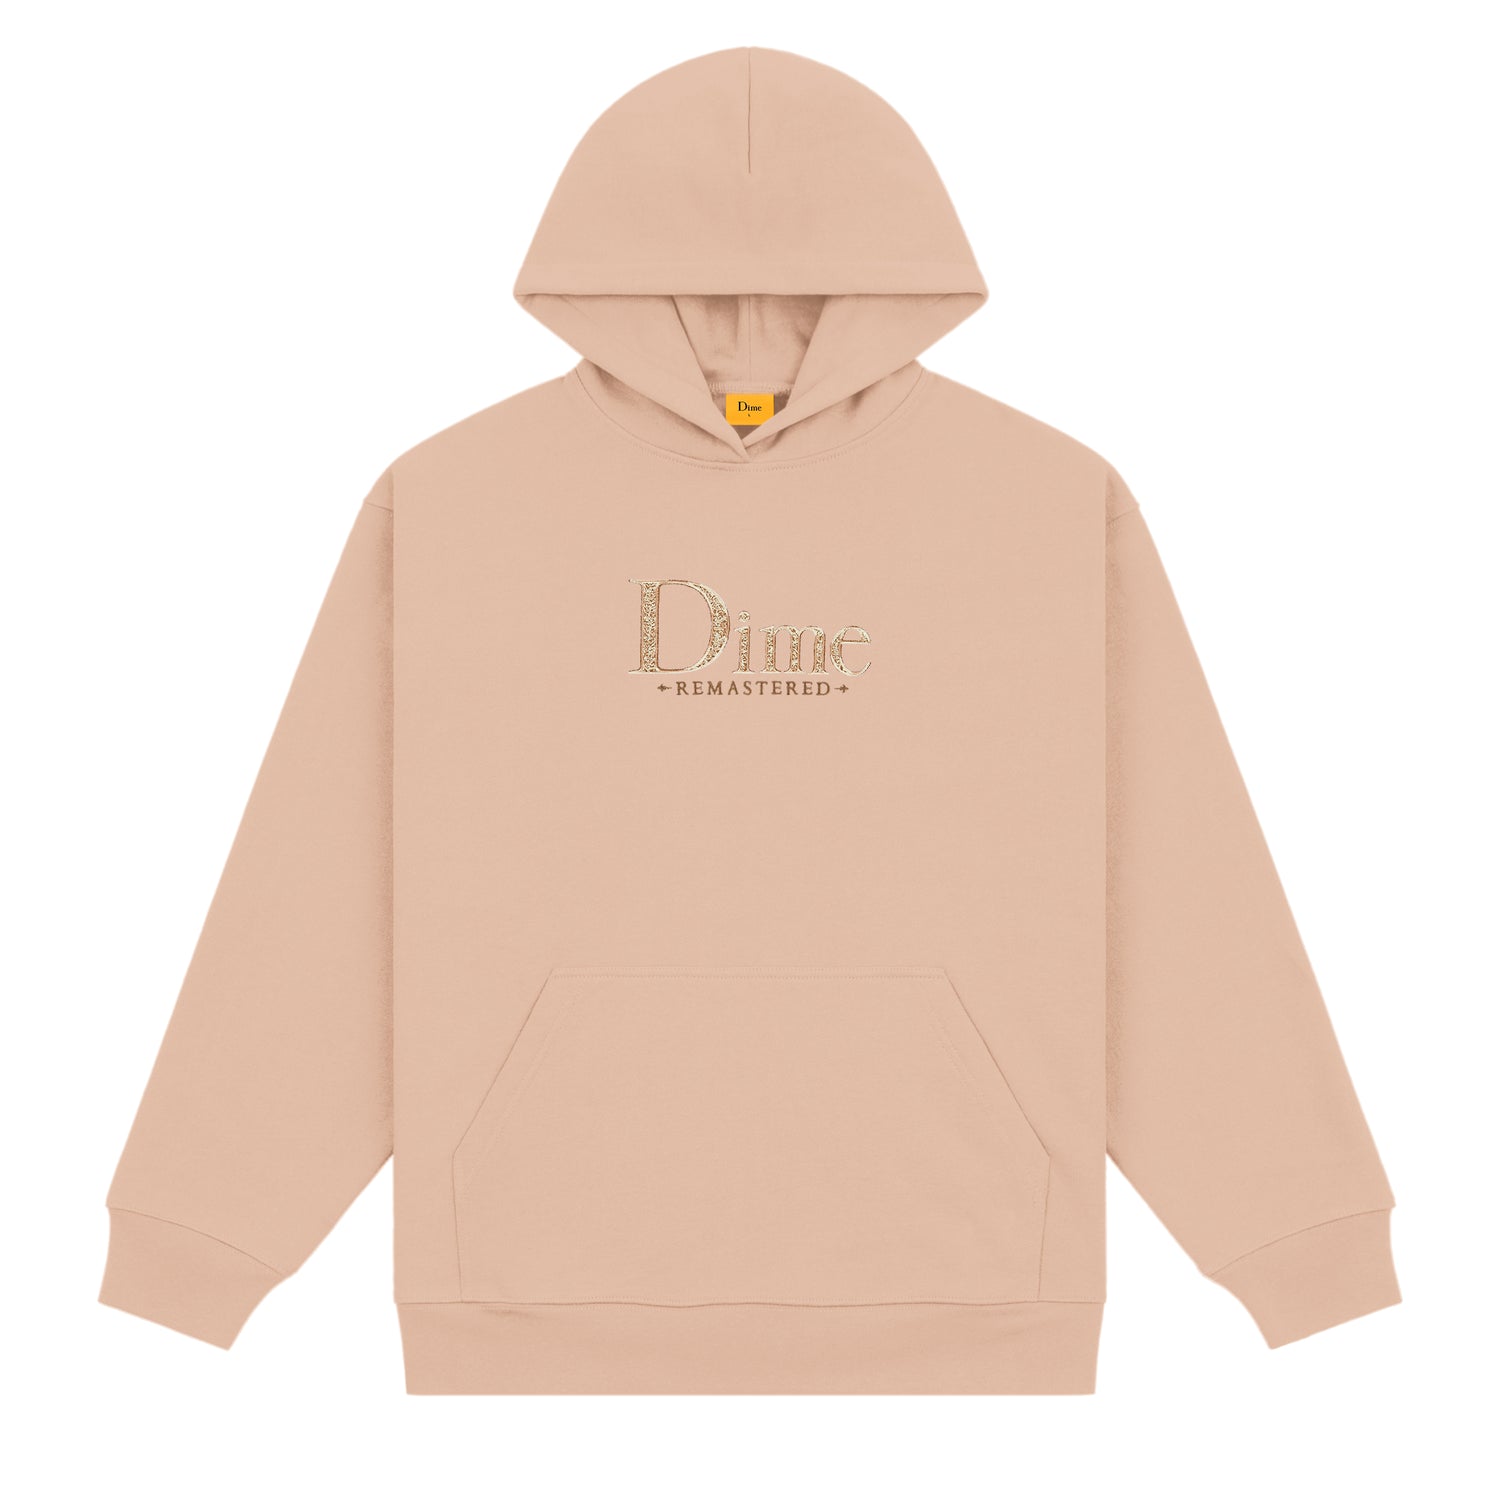 Classic Remastered Pullover, Tan